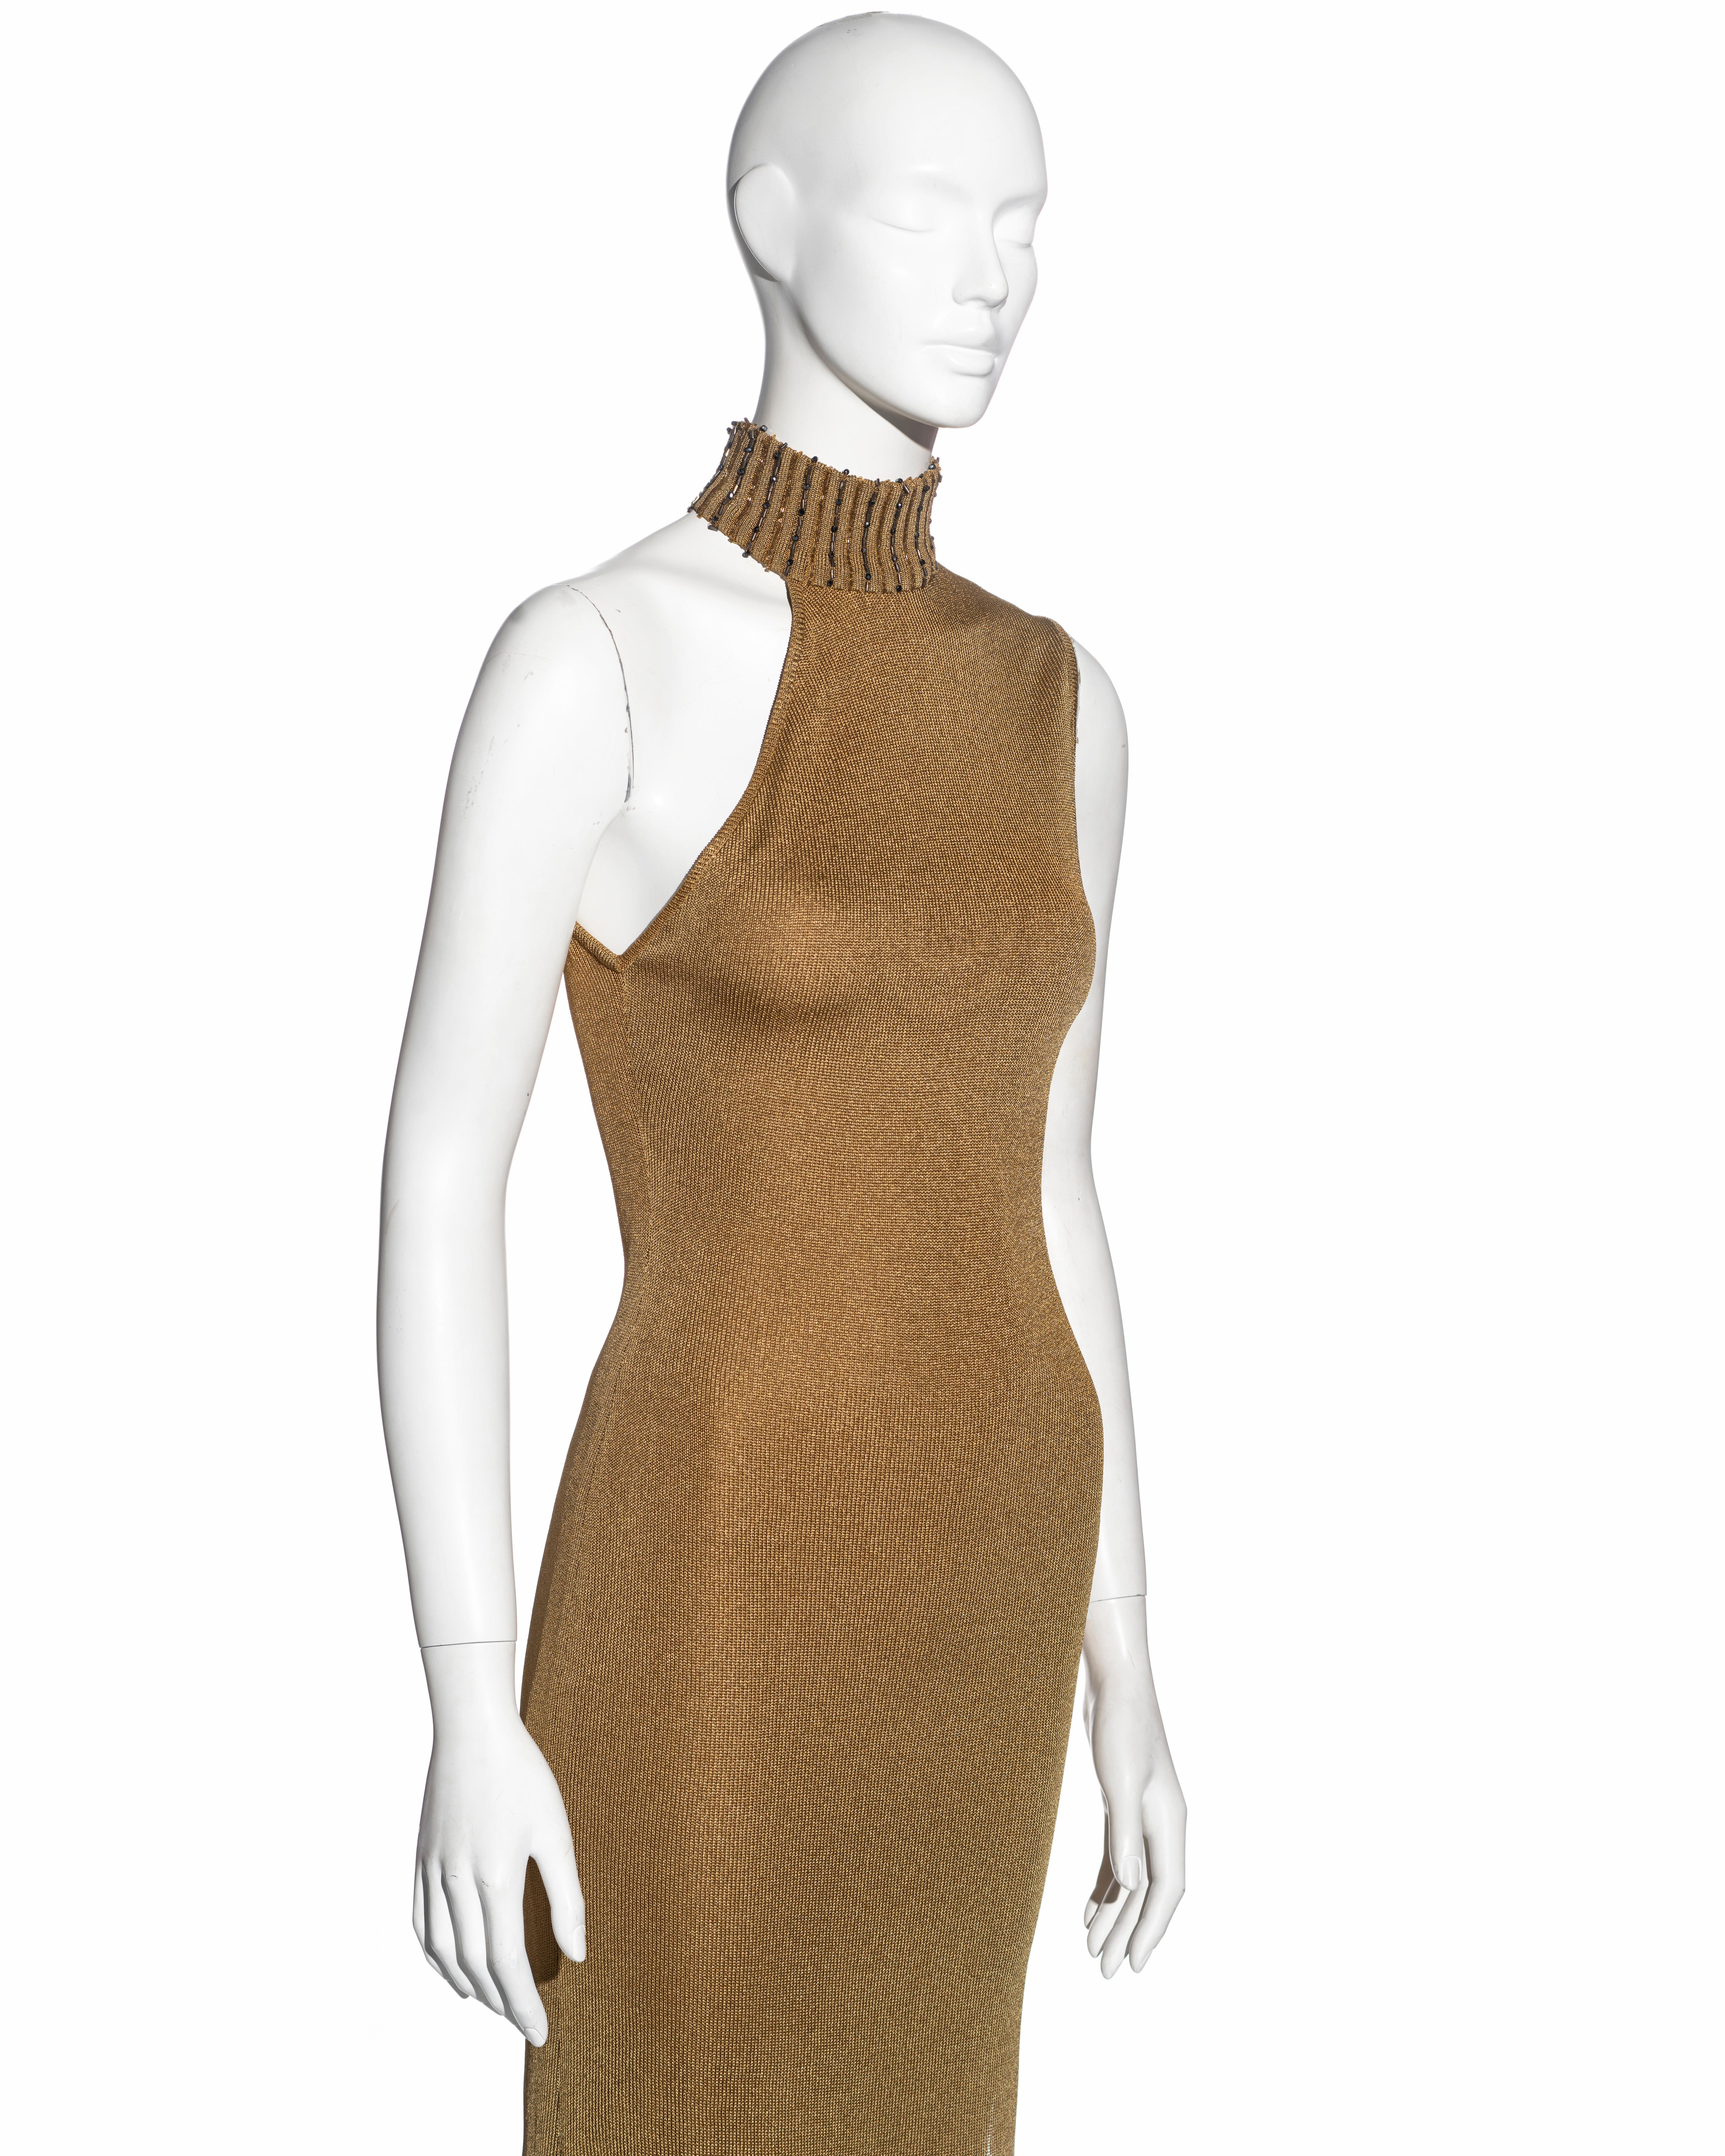 Gianni Versace gold knitted asymmetric evening dress, fw 1996 For Sale 4